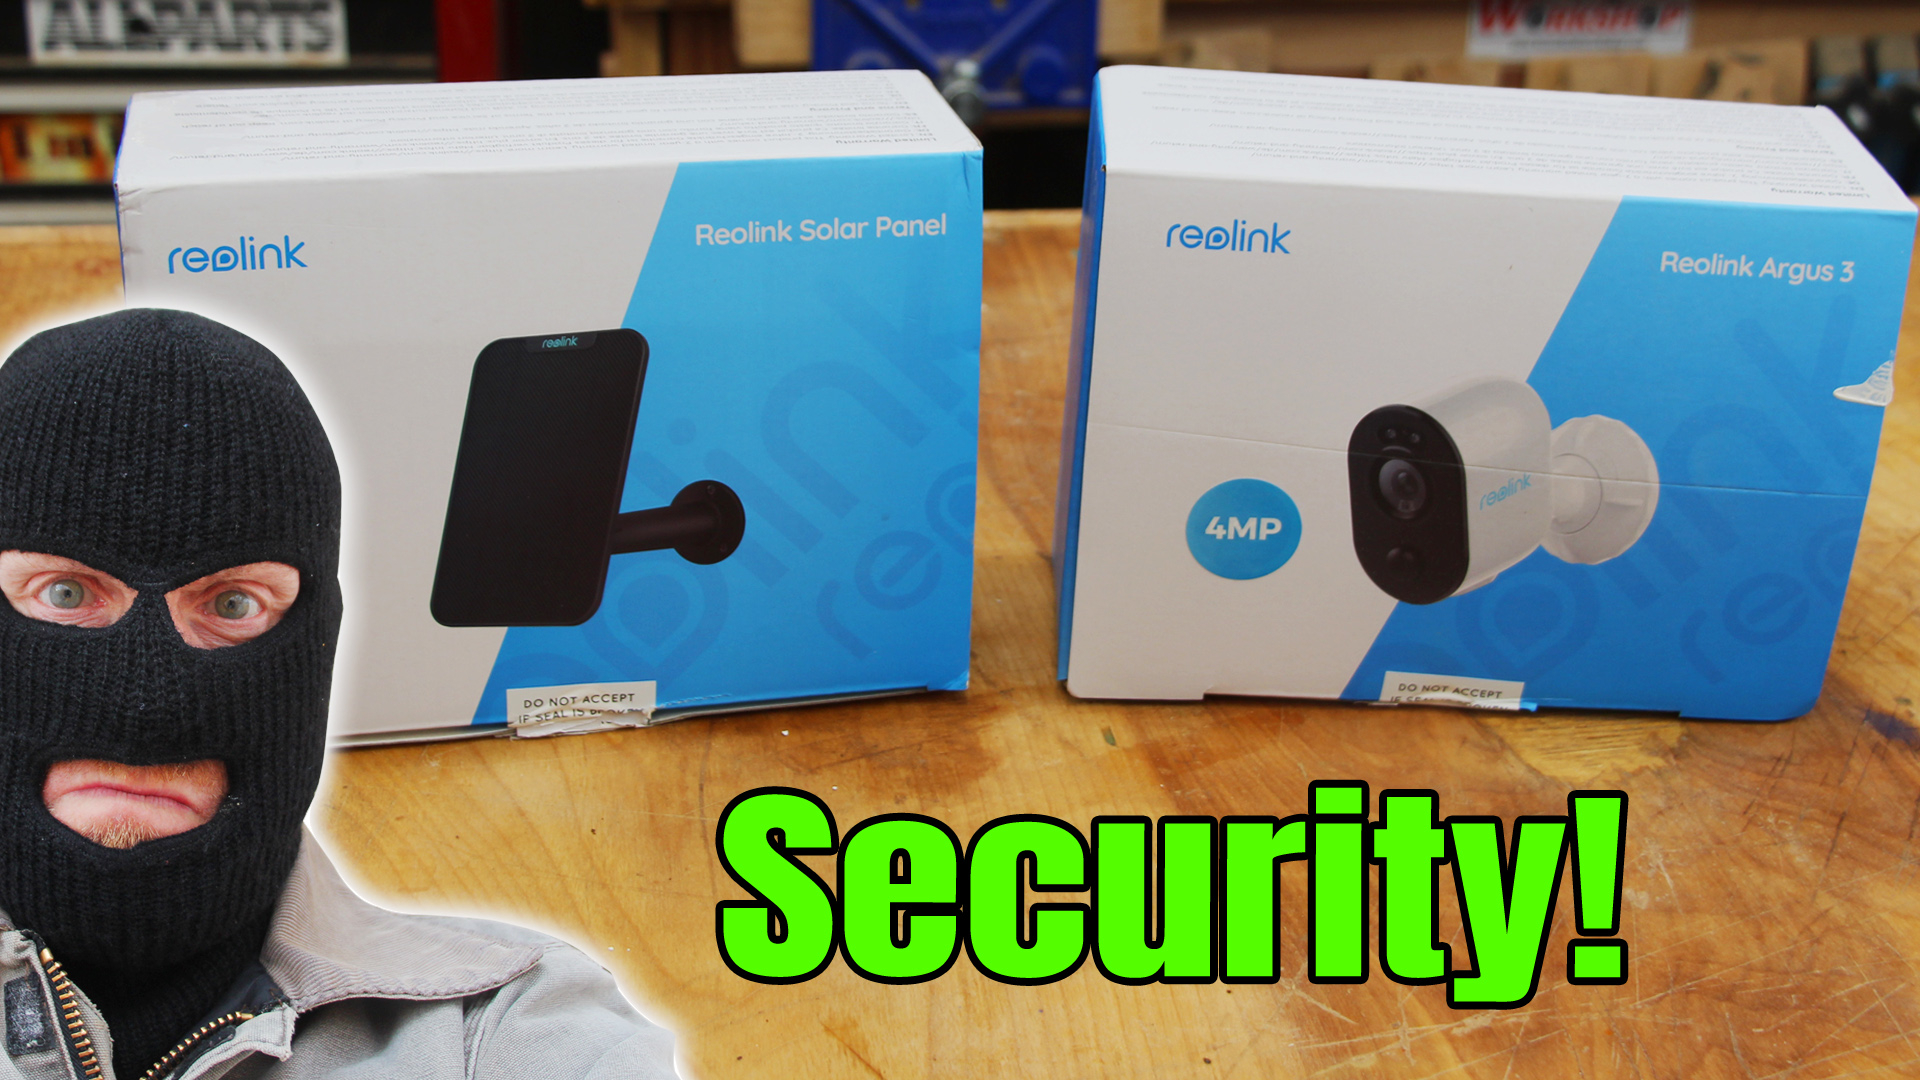 Installing the Reolink Argus 3 4MP security Camera